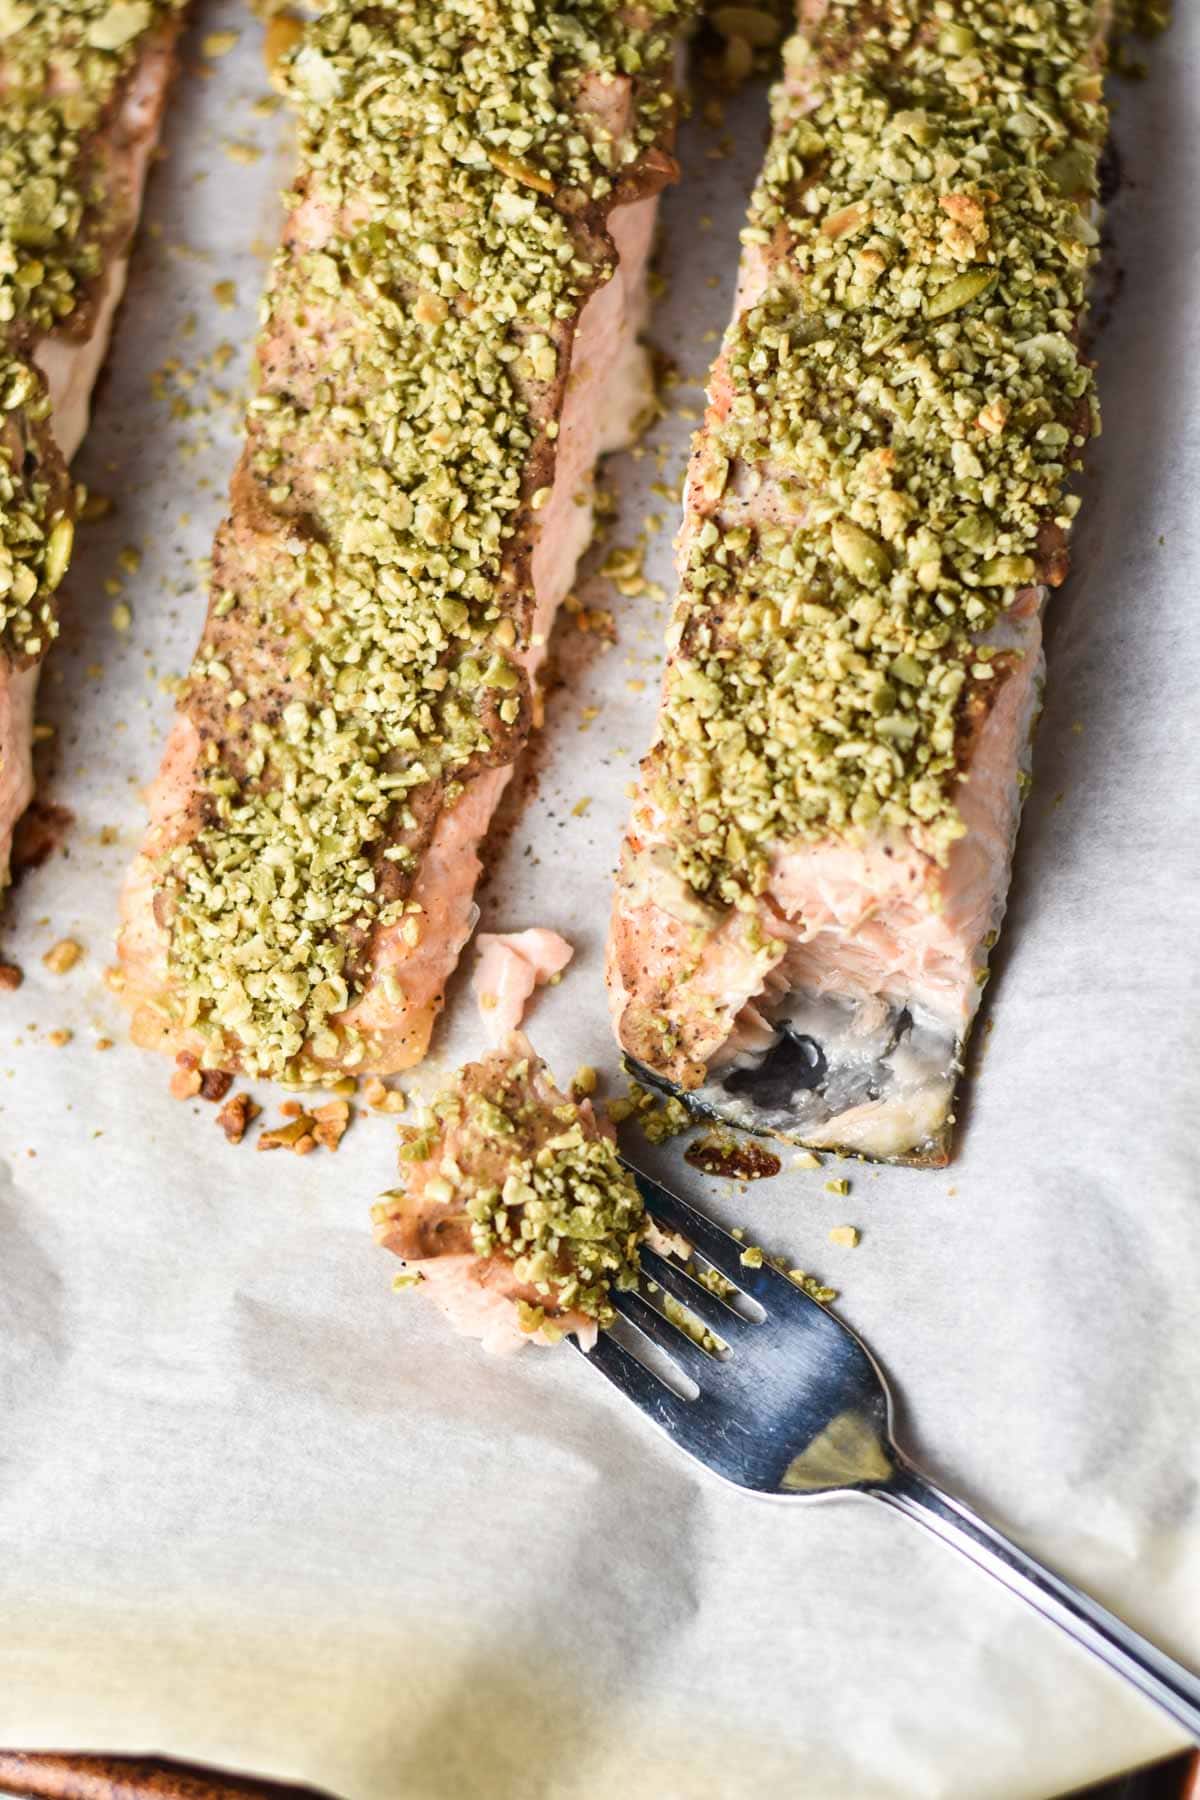 Salmon fillets topped with pepita seeds on a baking sheet.